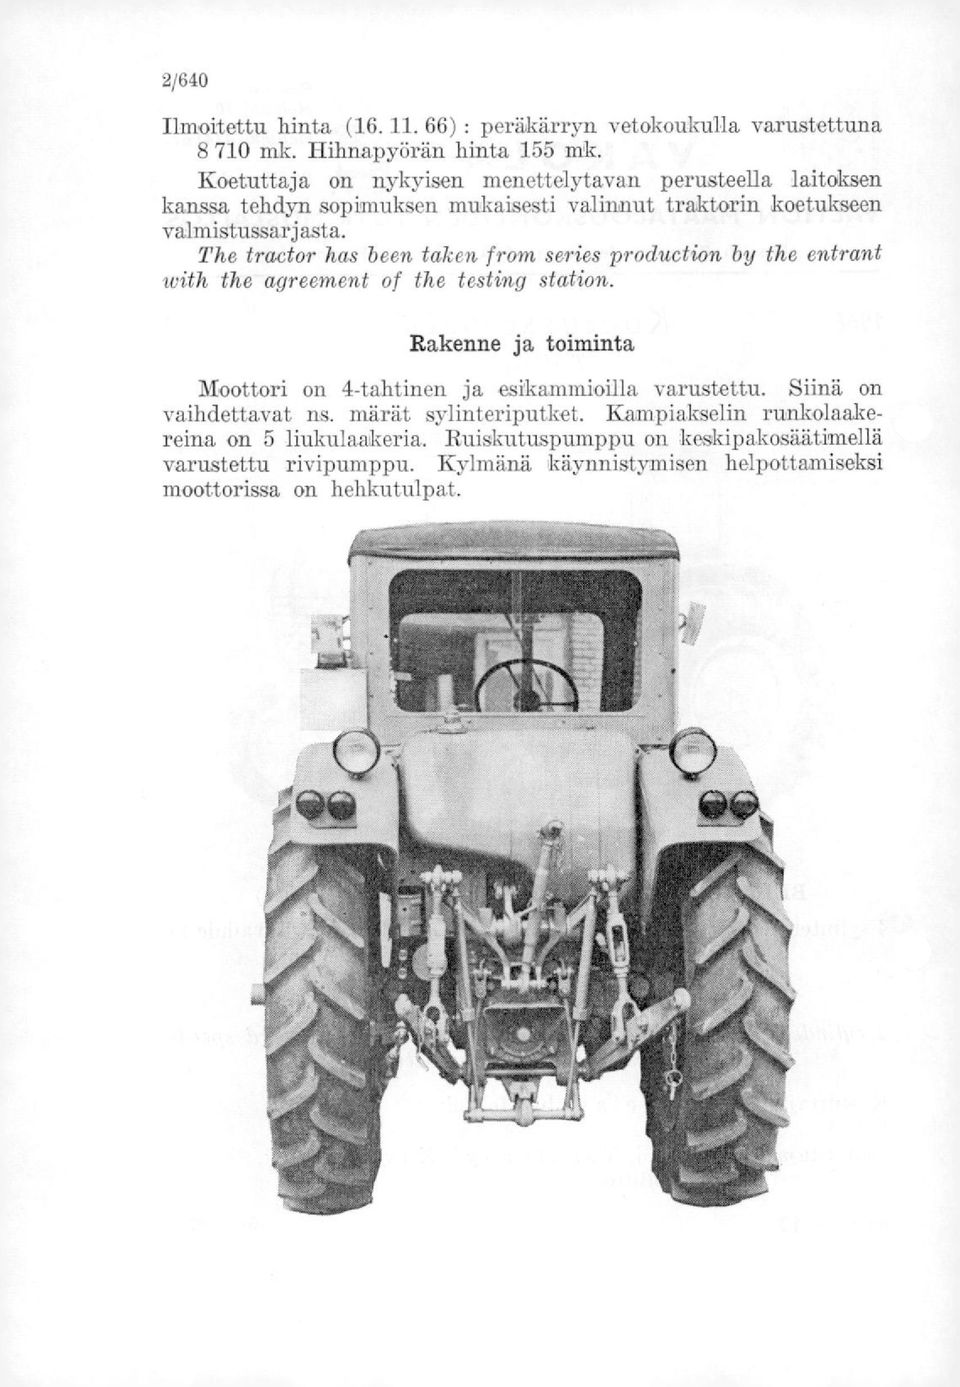 The tractor has been taken from series production by the entrant with the agreement of the testing station.